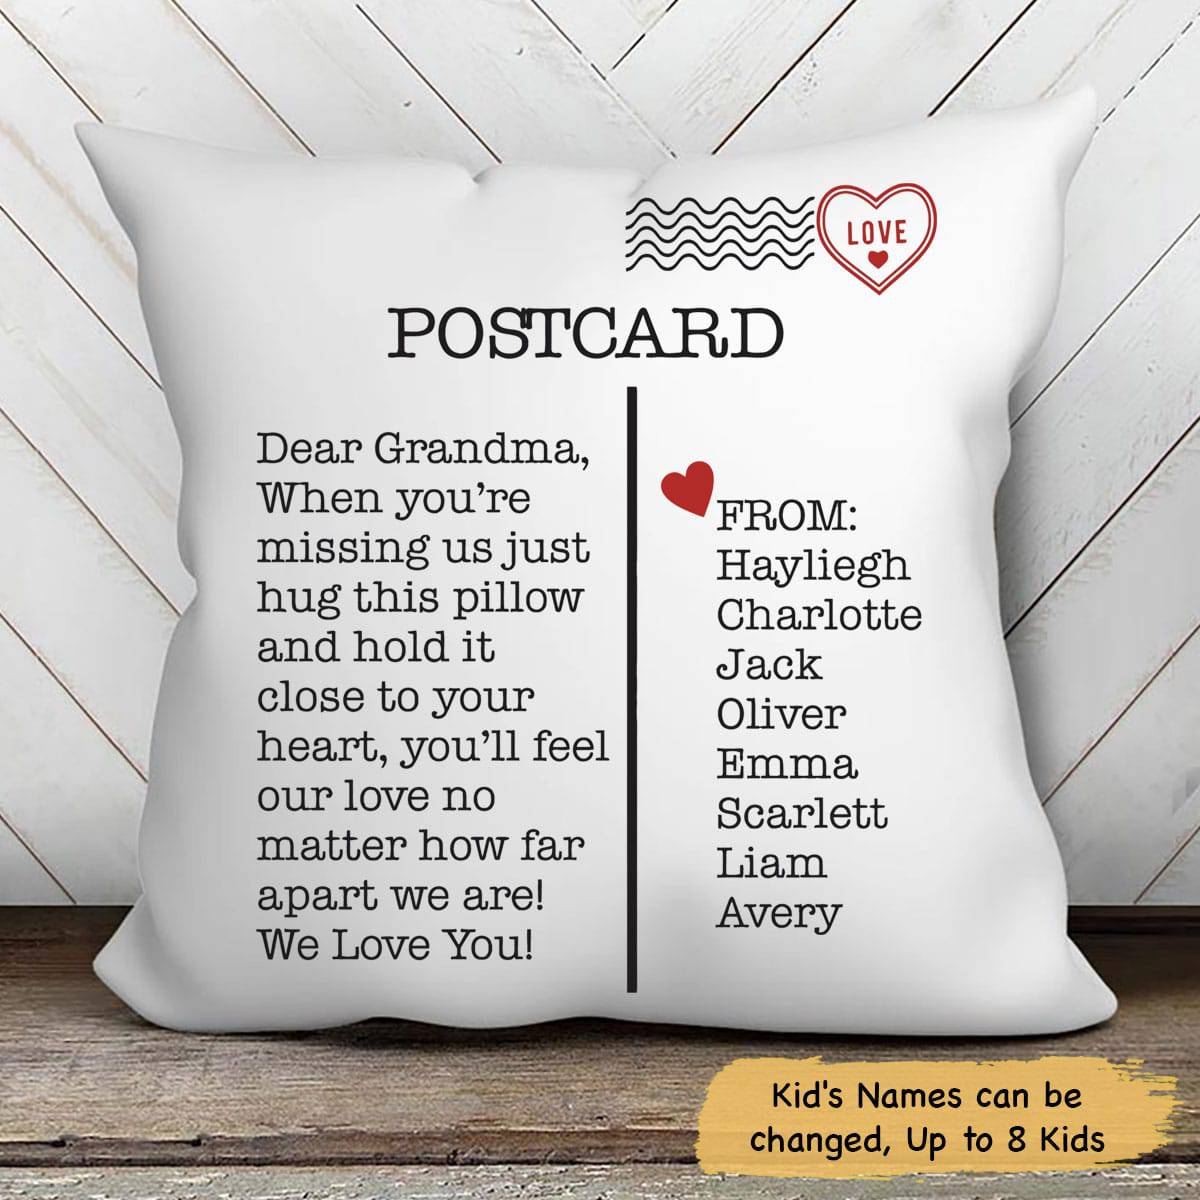 Download To Grandma With Love Postcard Pillow Cover Personalized Holiday Gift Gearcustoms Com